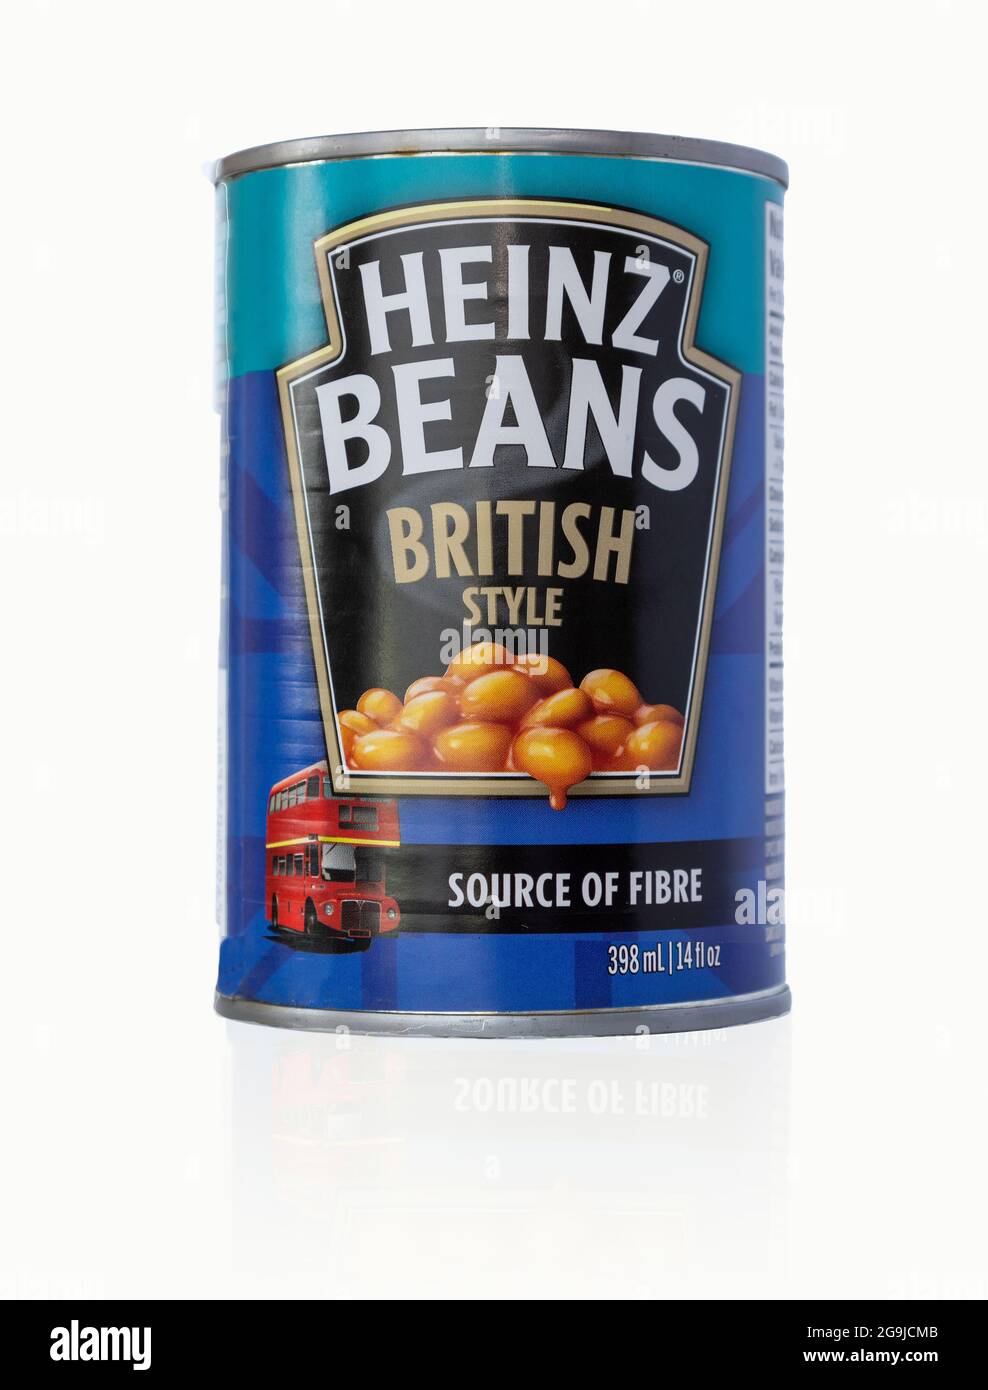 Canadian Heinz Baked Beans British Style Can Different Recipe To The Canadian Regular Heinz Baked Beans With Less Sugar And Lower Calories Stock Photo